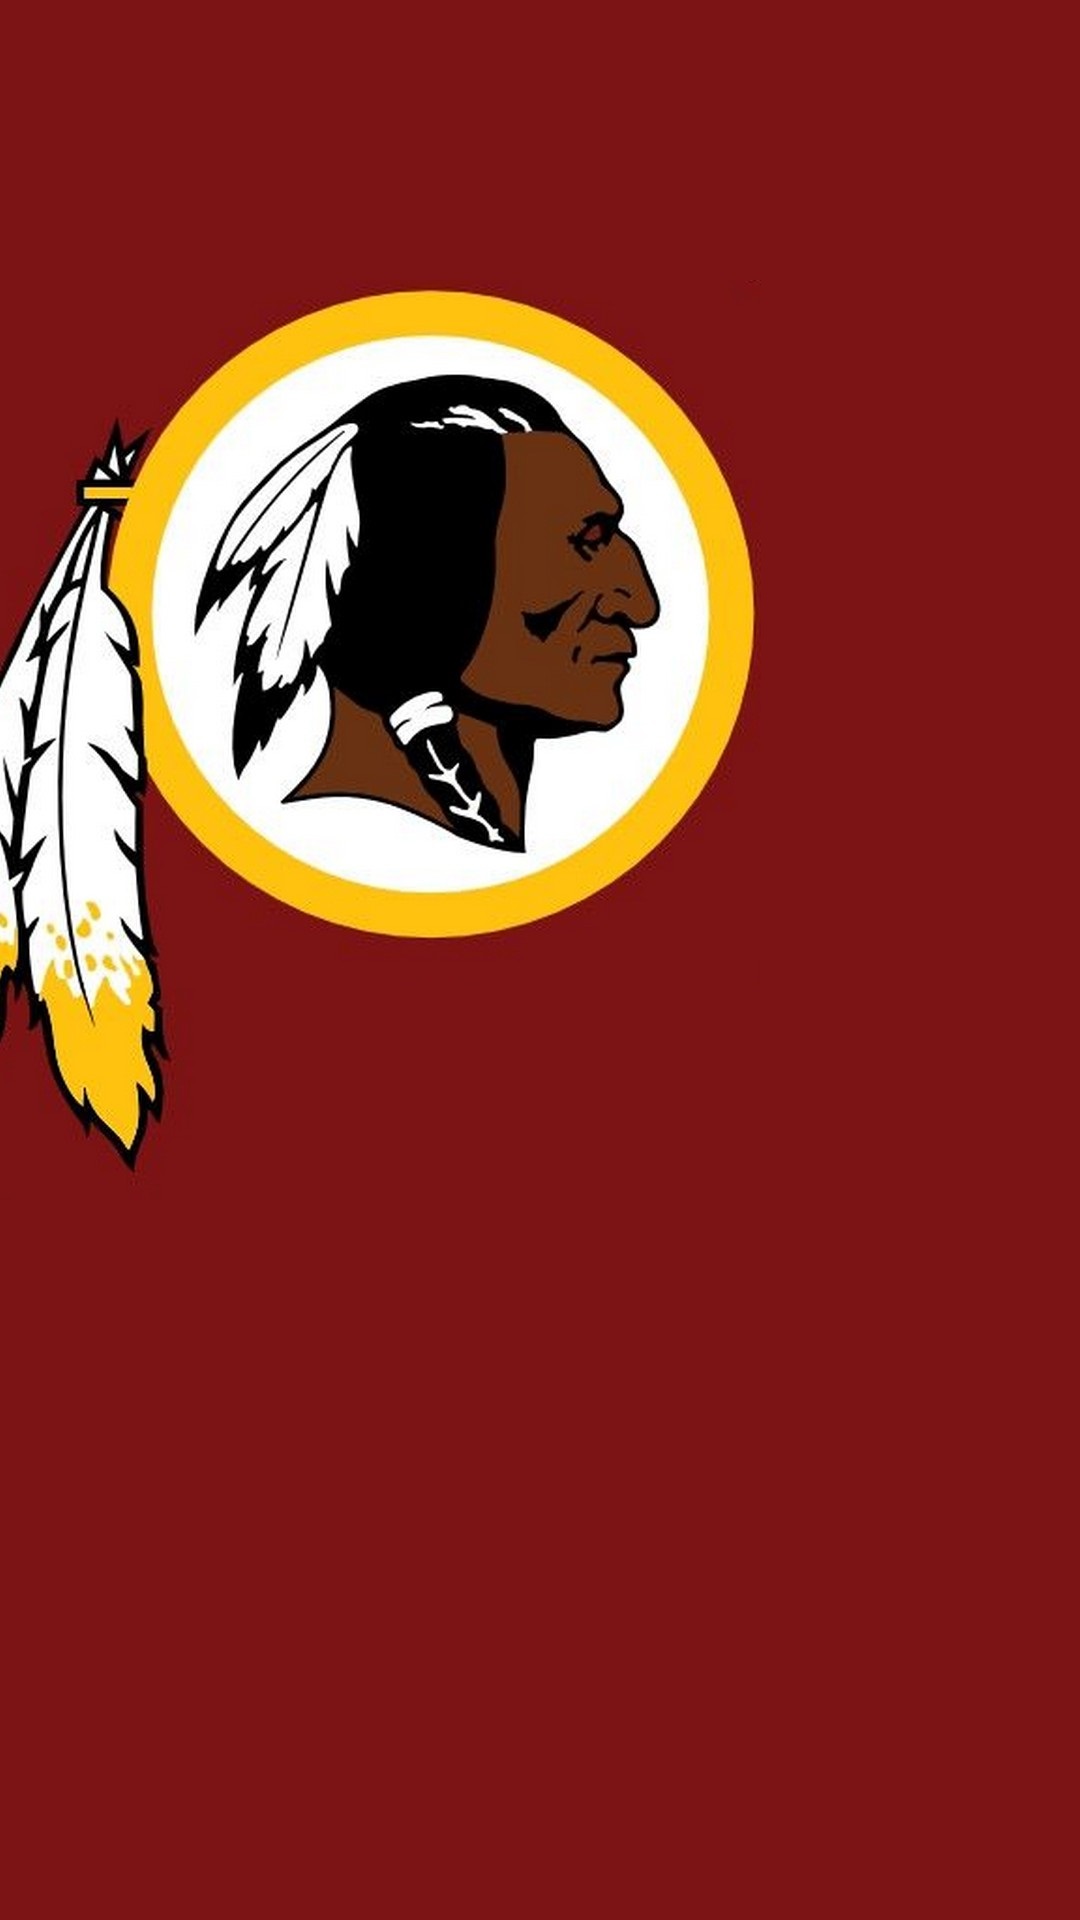 Screensaver iPhone Washington Redskins with high-resolution 1080x1920 pixel. Donwload and set as wallpaper for your iPhone X, iPhone XS home screen backgrounds, XS Max, XR, iPhone8 lock screen wallpaper, iPhone 7, 6, SE and other mobile devices